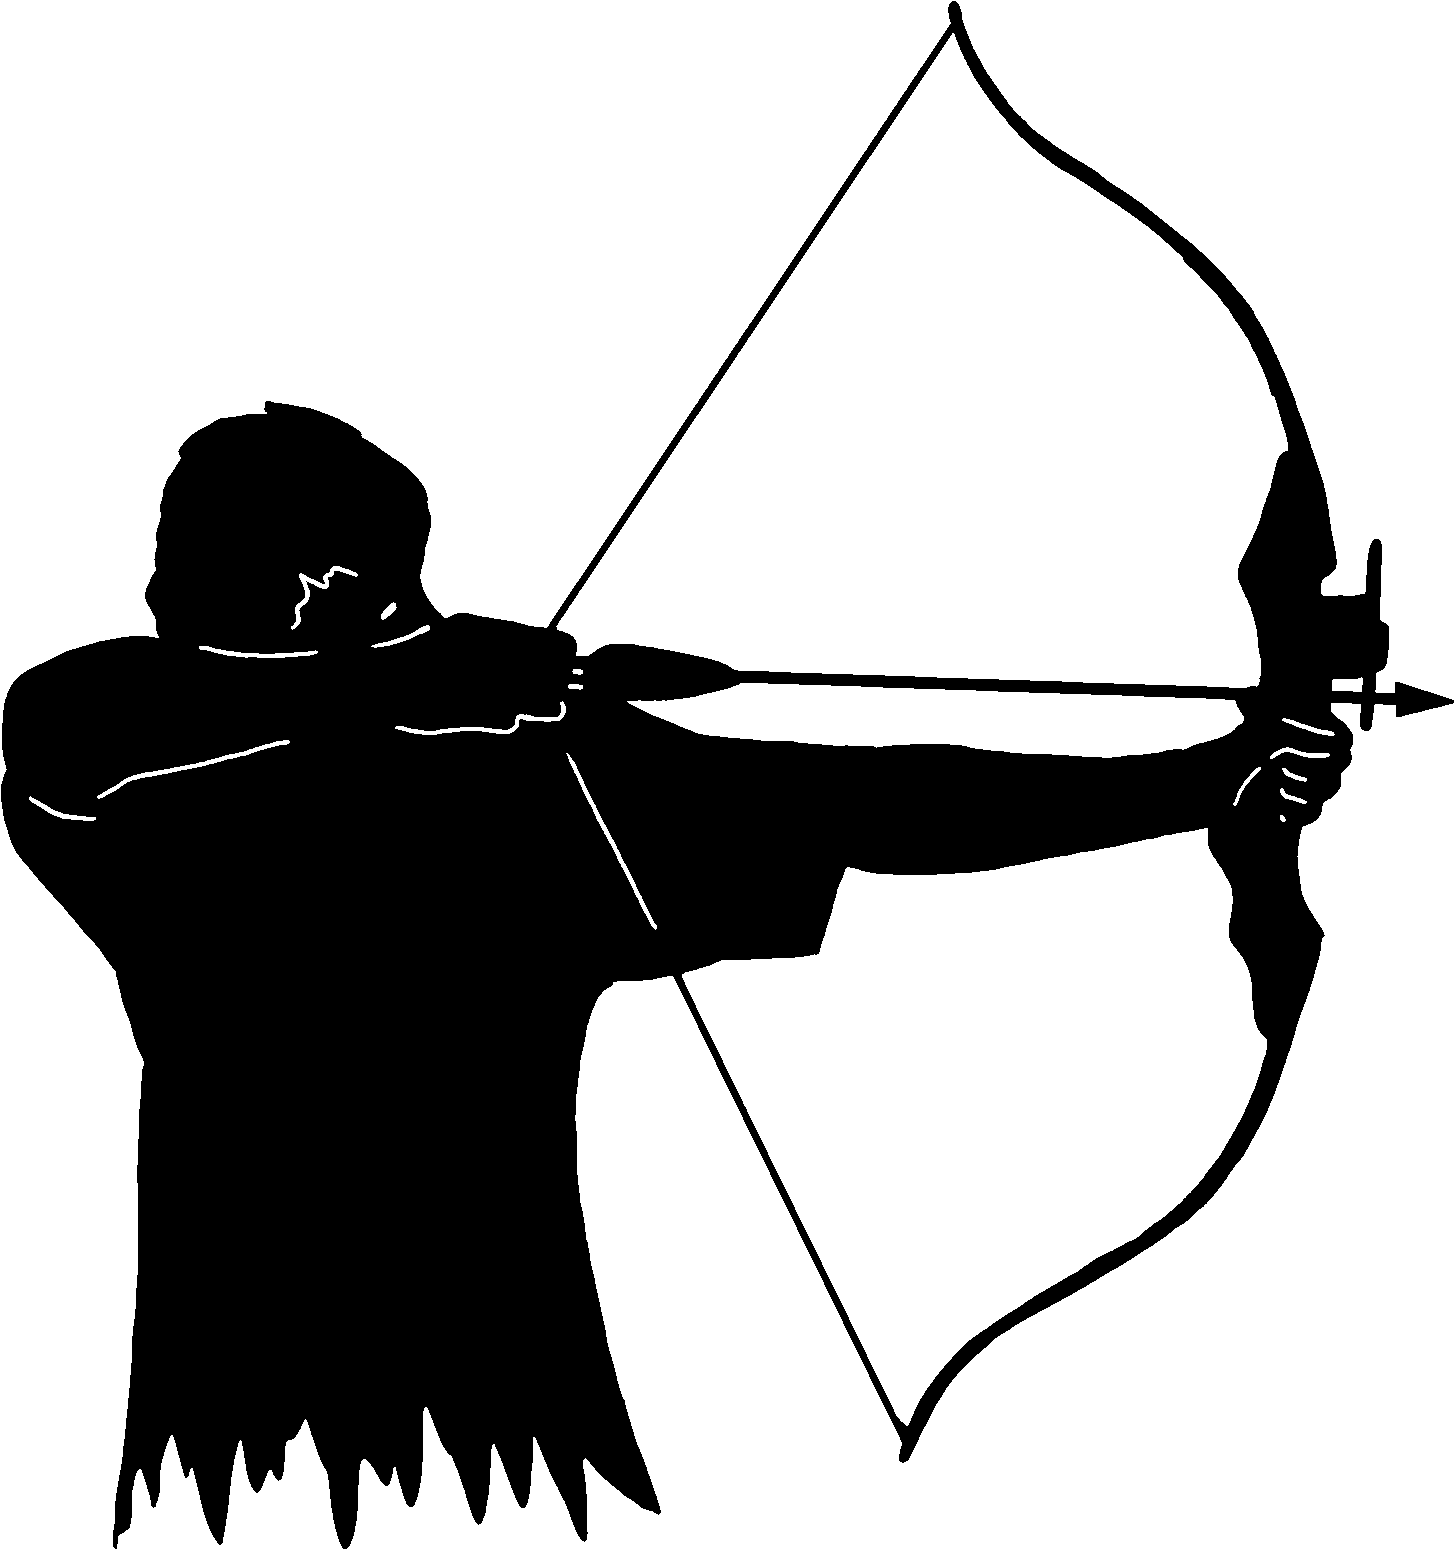 Archery free download clip art on clipart library